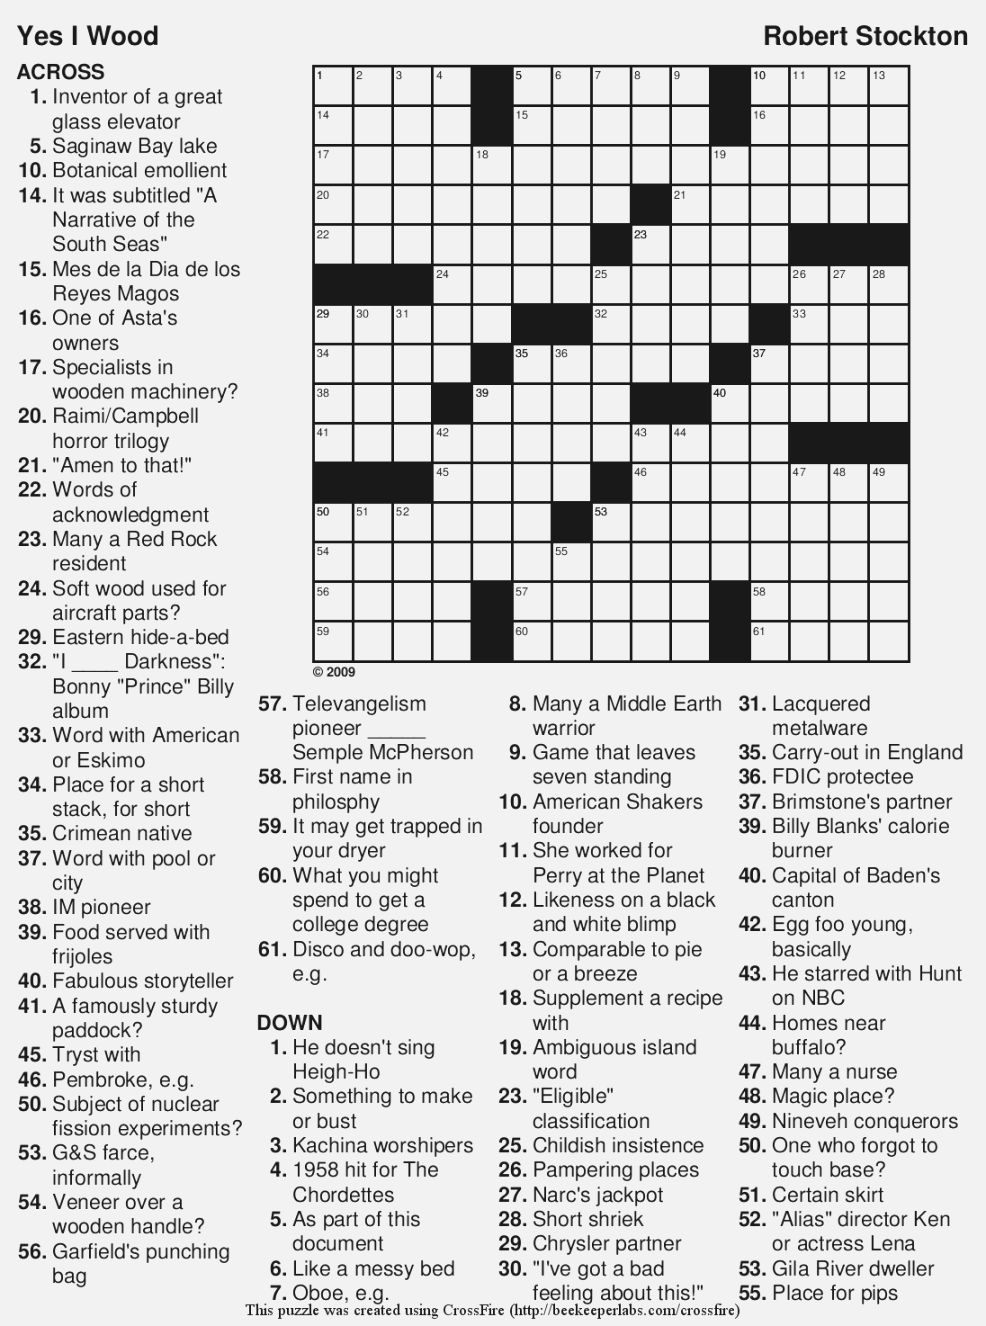 Free Printable Large Print Crossword Puzzles Visually Impaired